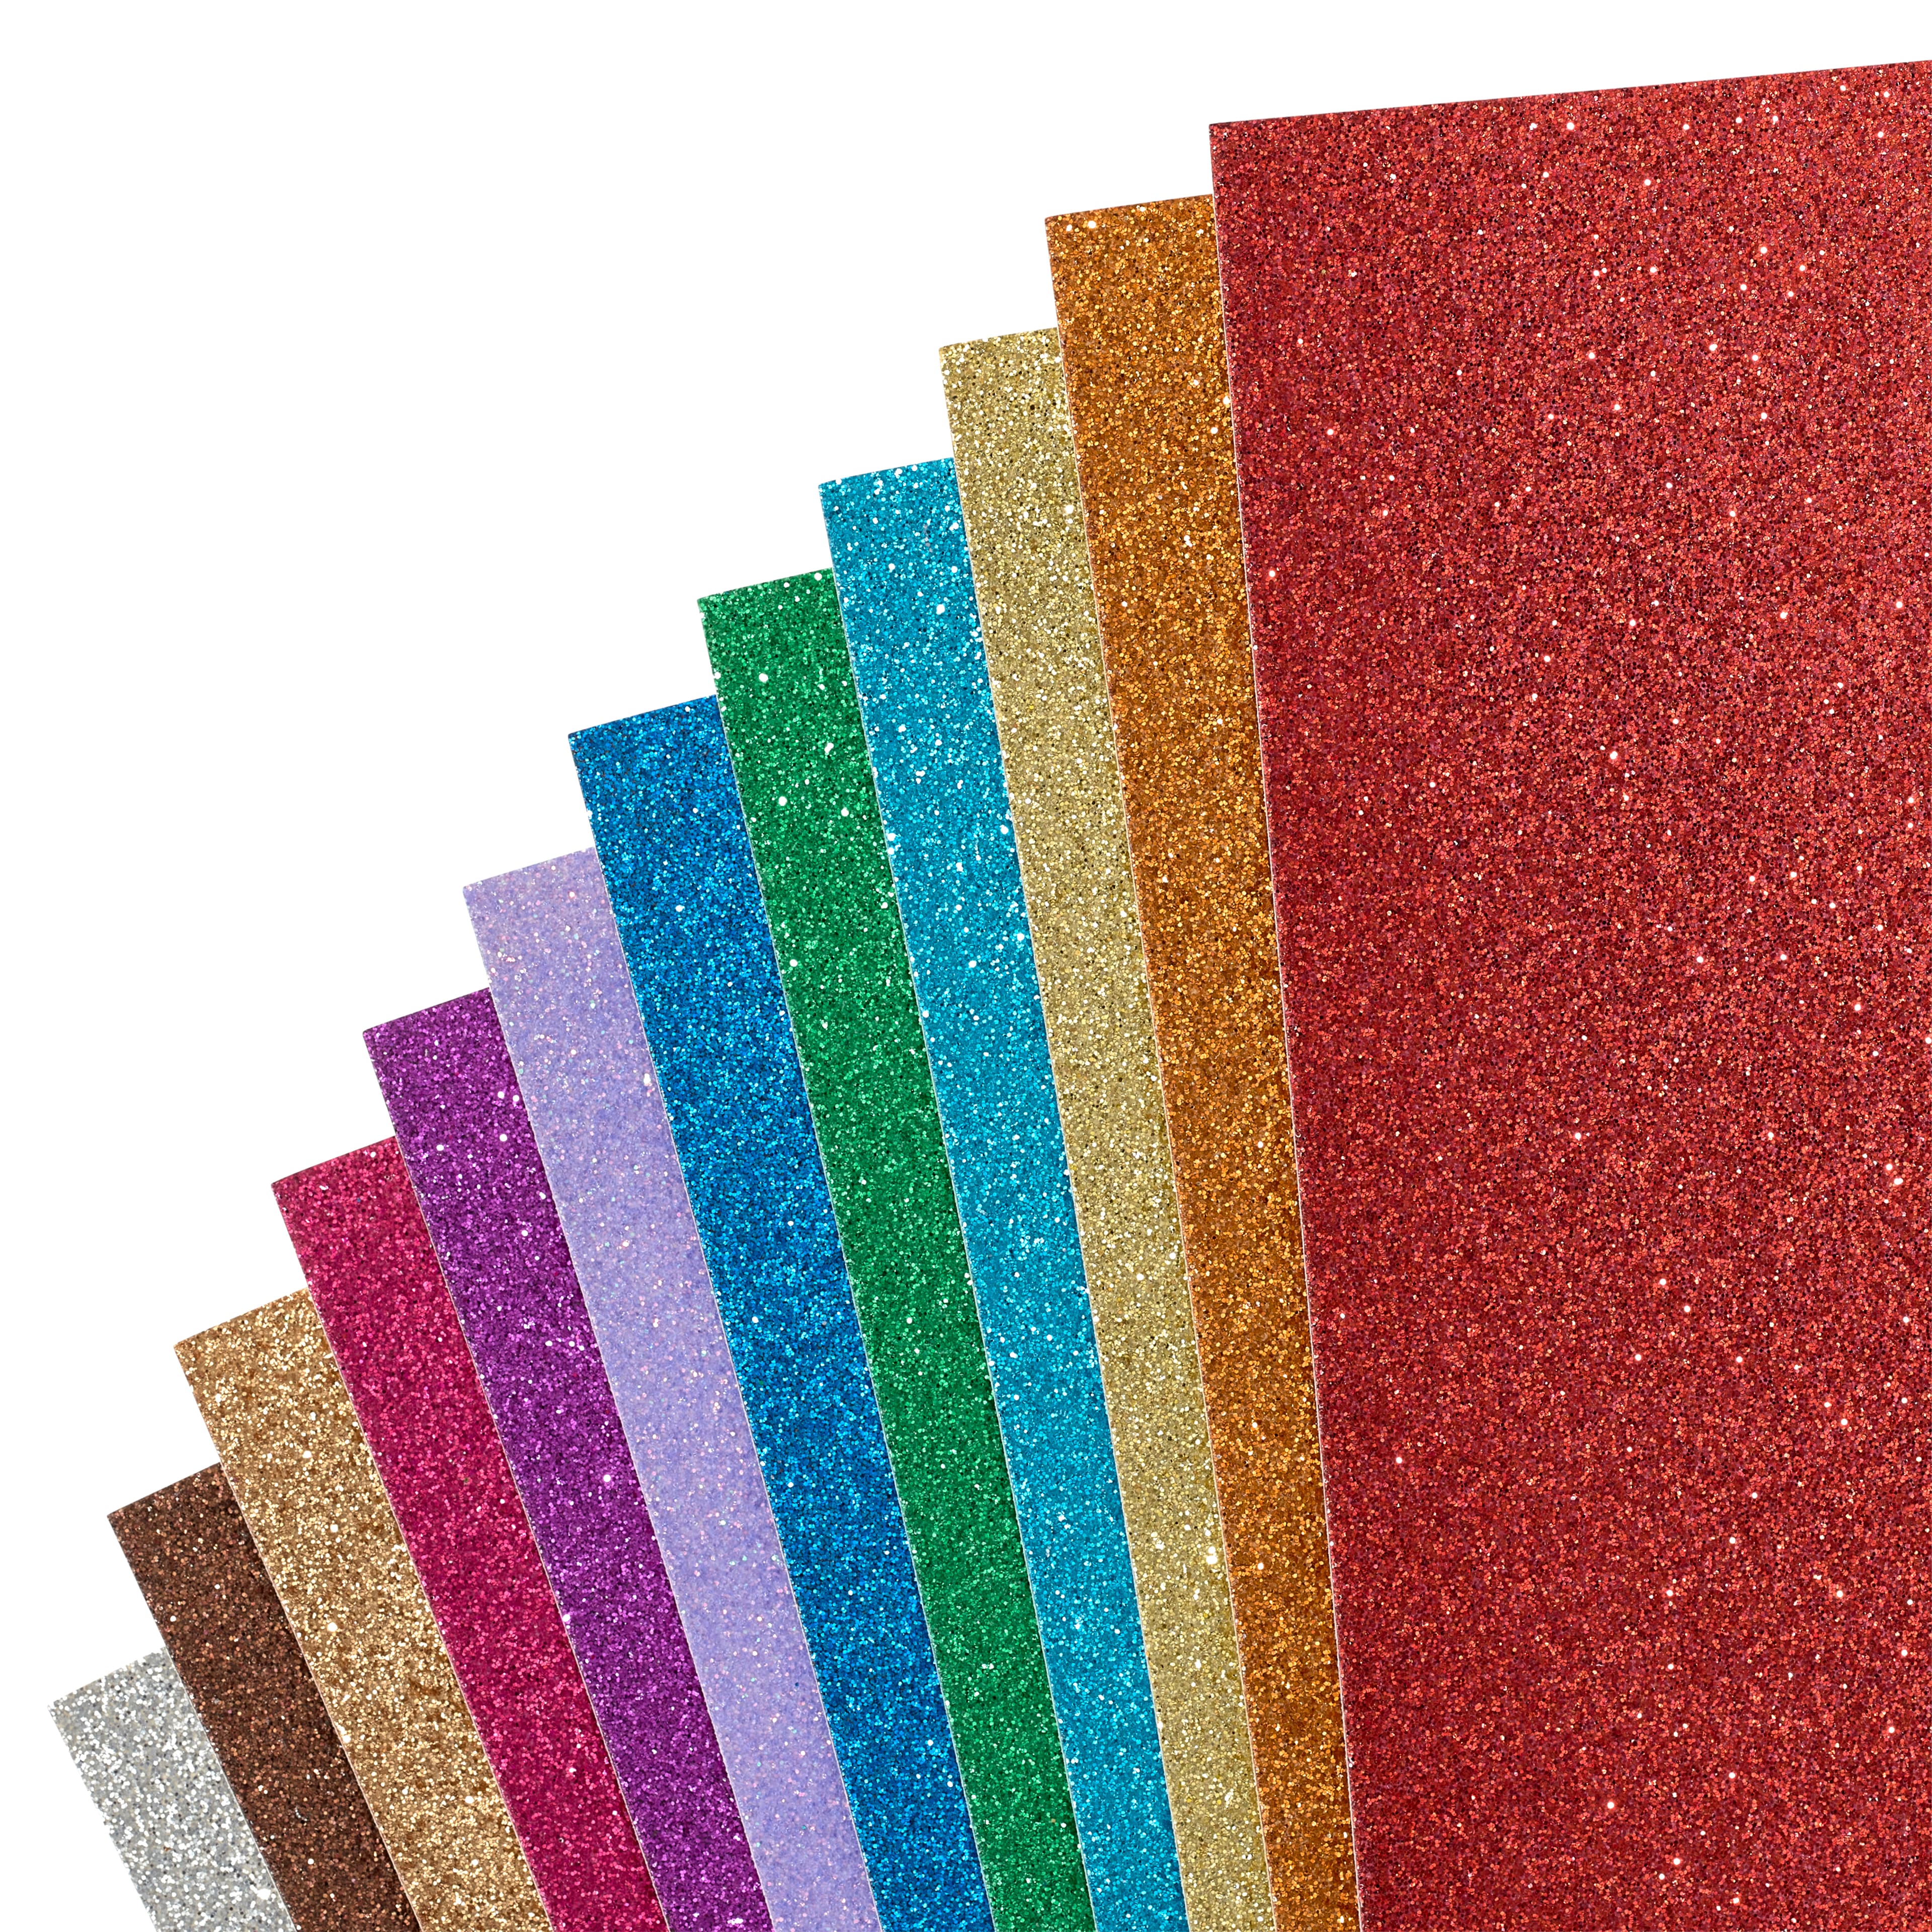 Michaels Bulk 6 Packs: 24 Ct. (144 Total) Glitter 12 inch x 12 inch Cardstock Paper by Recollections, Size: 12 x 12, Gold